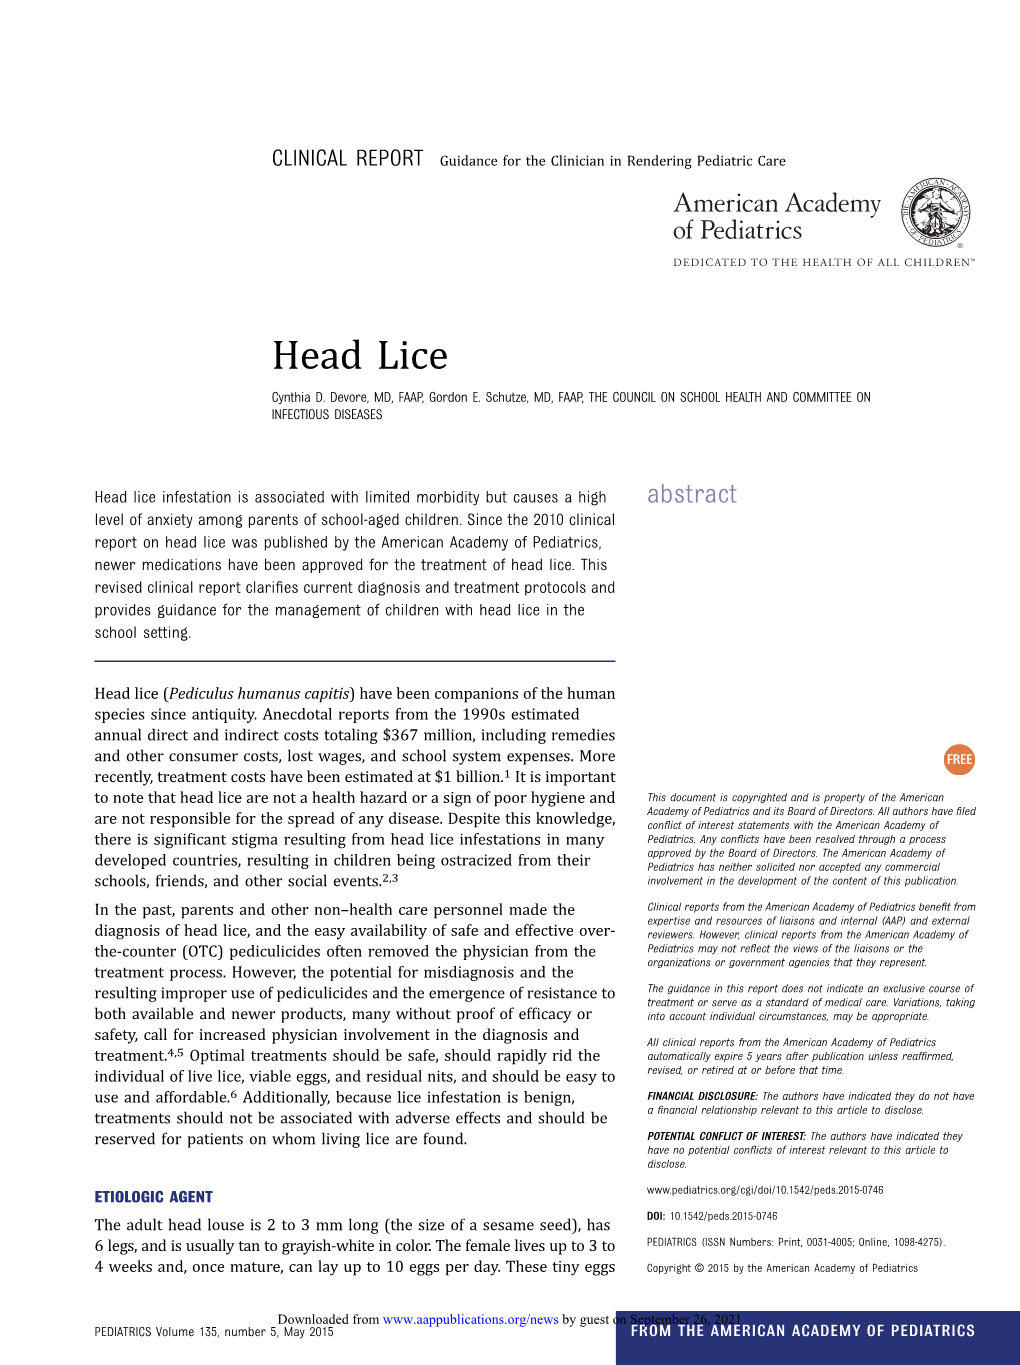 Clinical Report: Head Lice